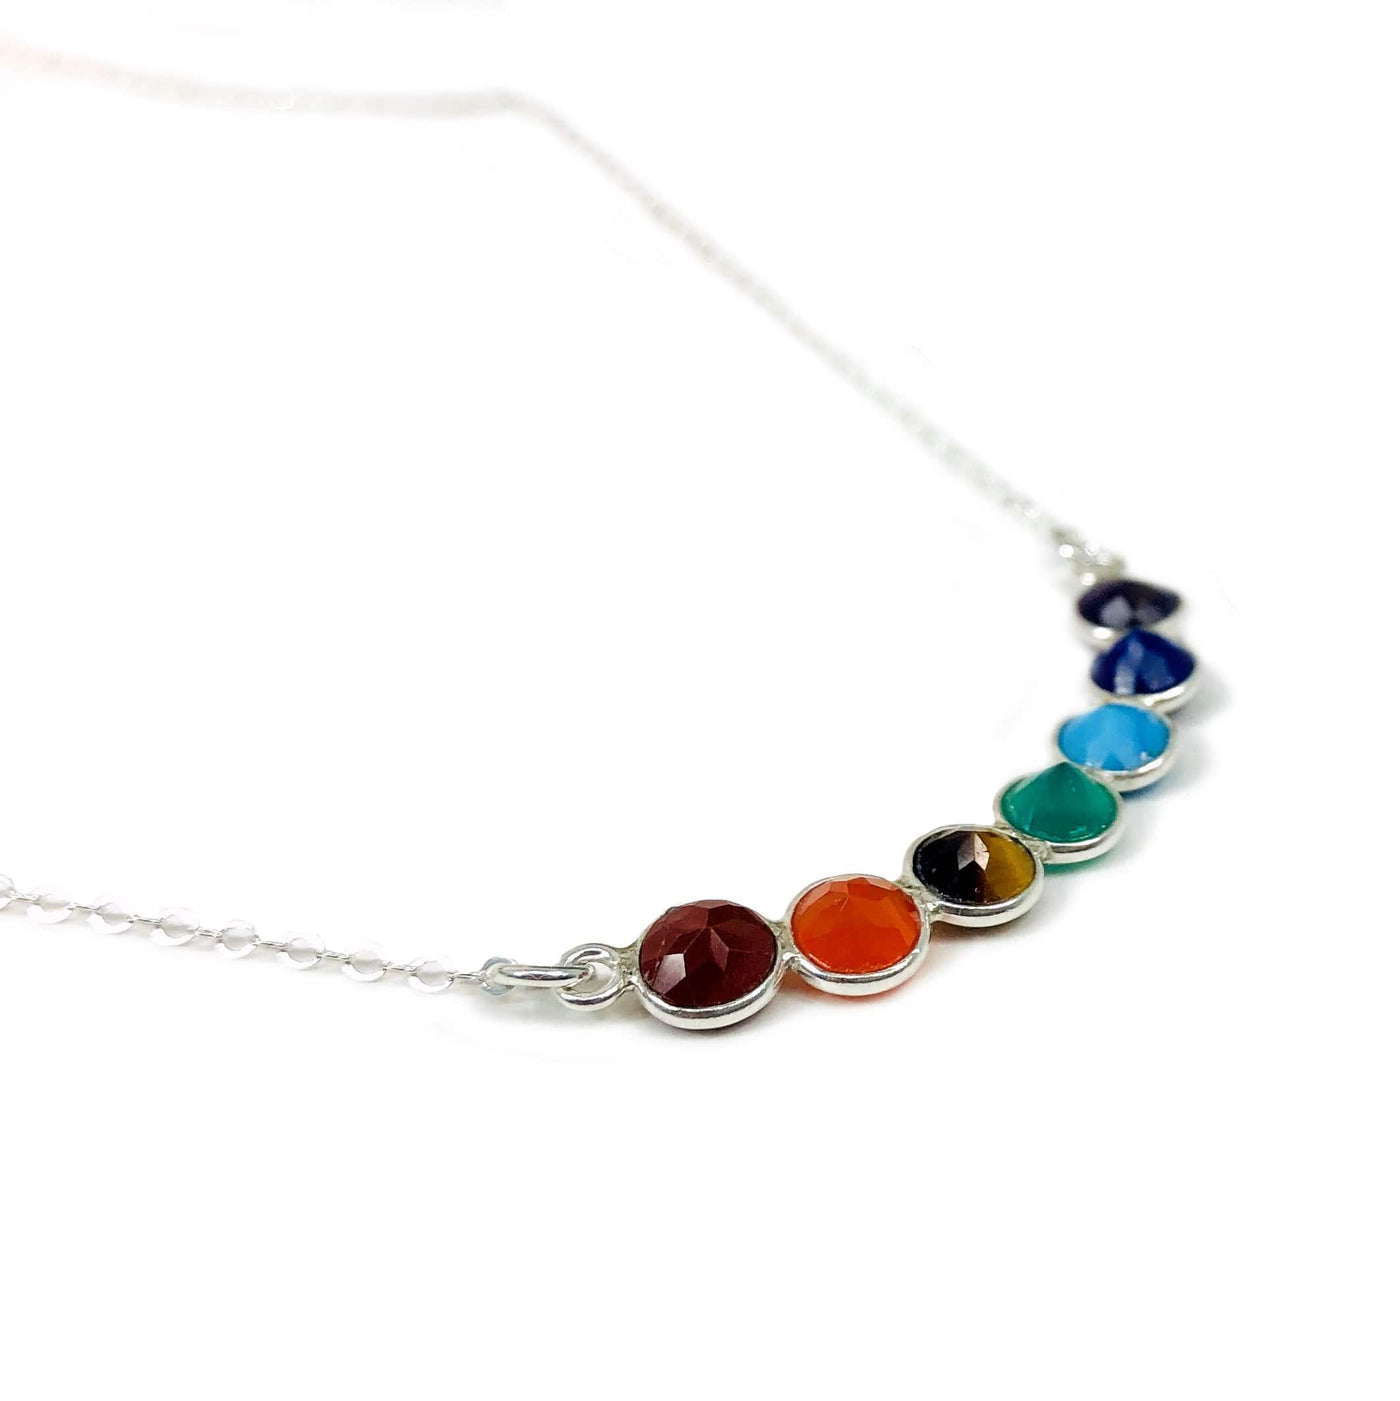 side view of the necklace showing the plated chakra stones